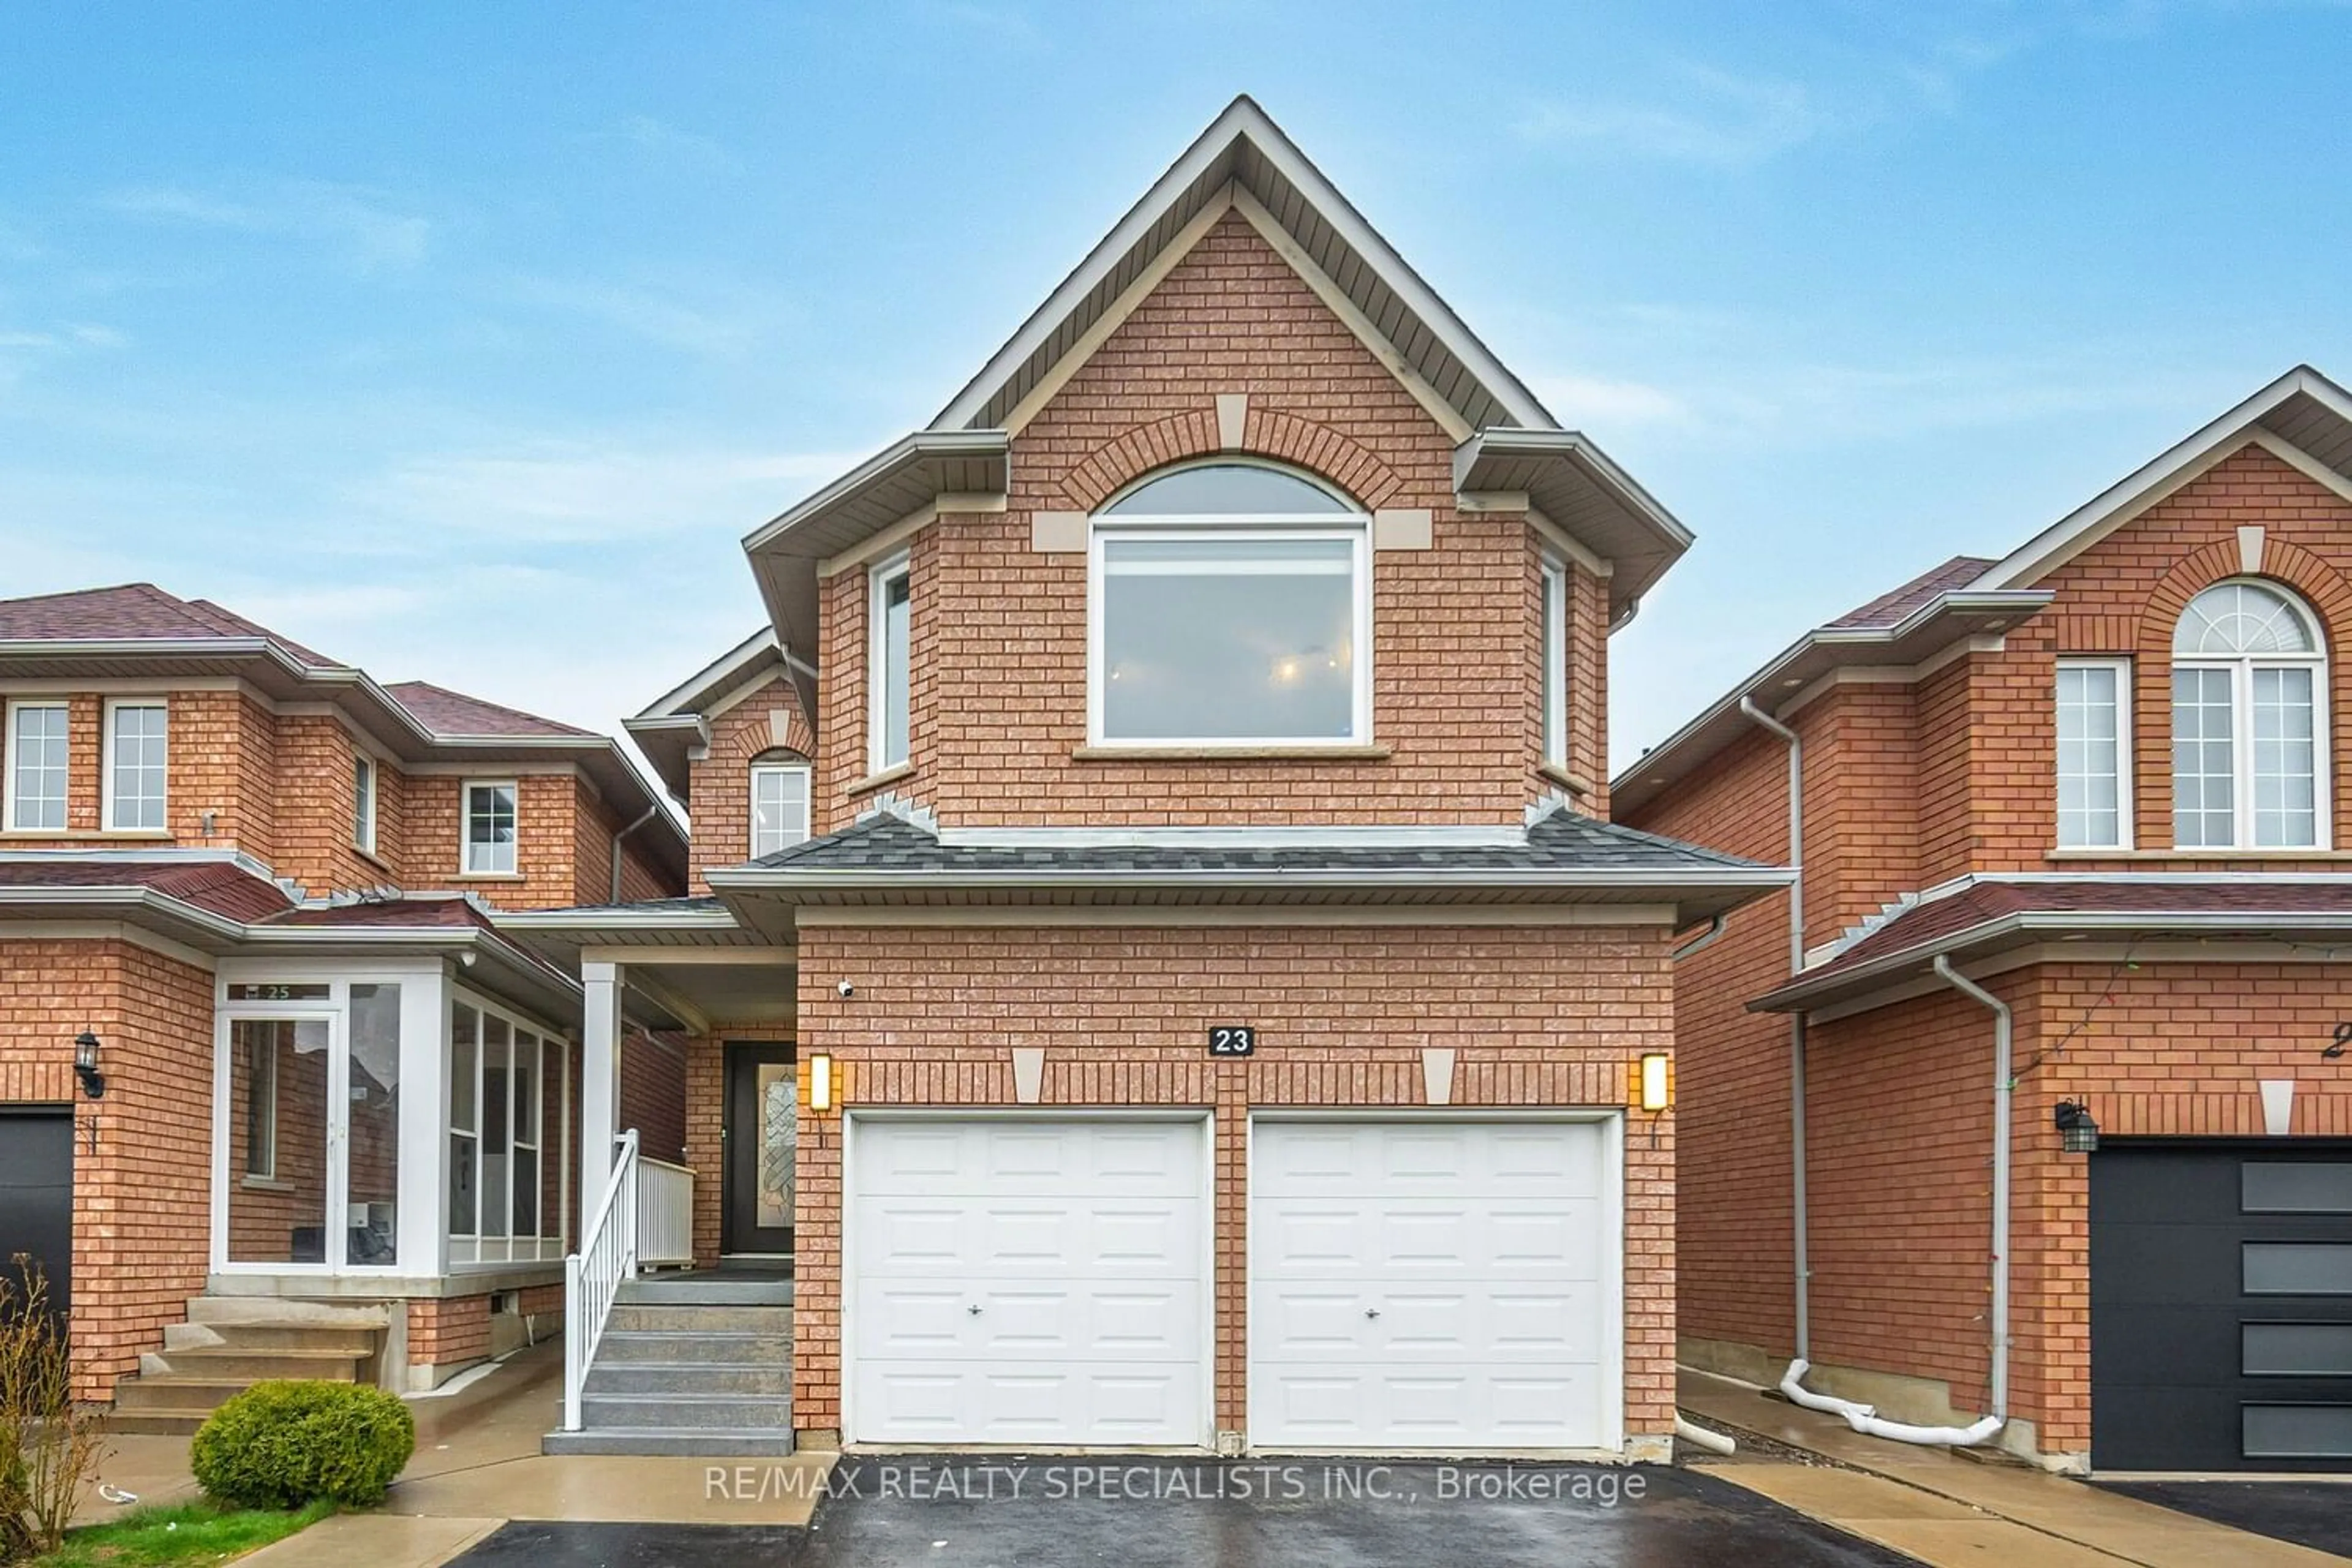 Home with brick exterior material for 23 Tigerlily Pl, Brampton Ontario L6R 2C6